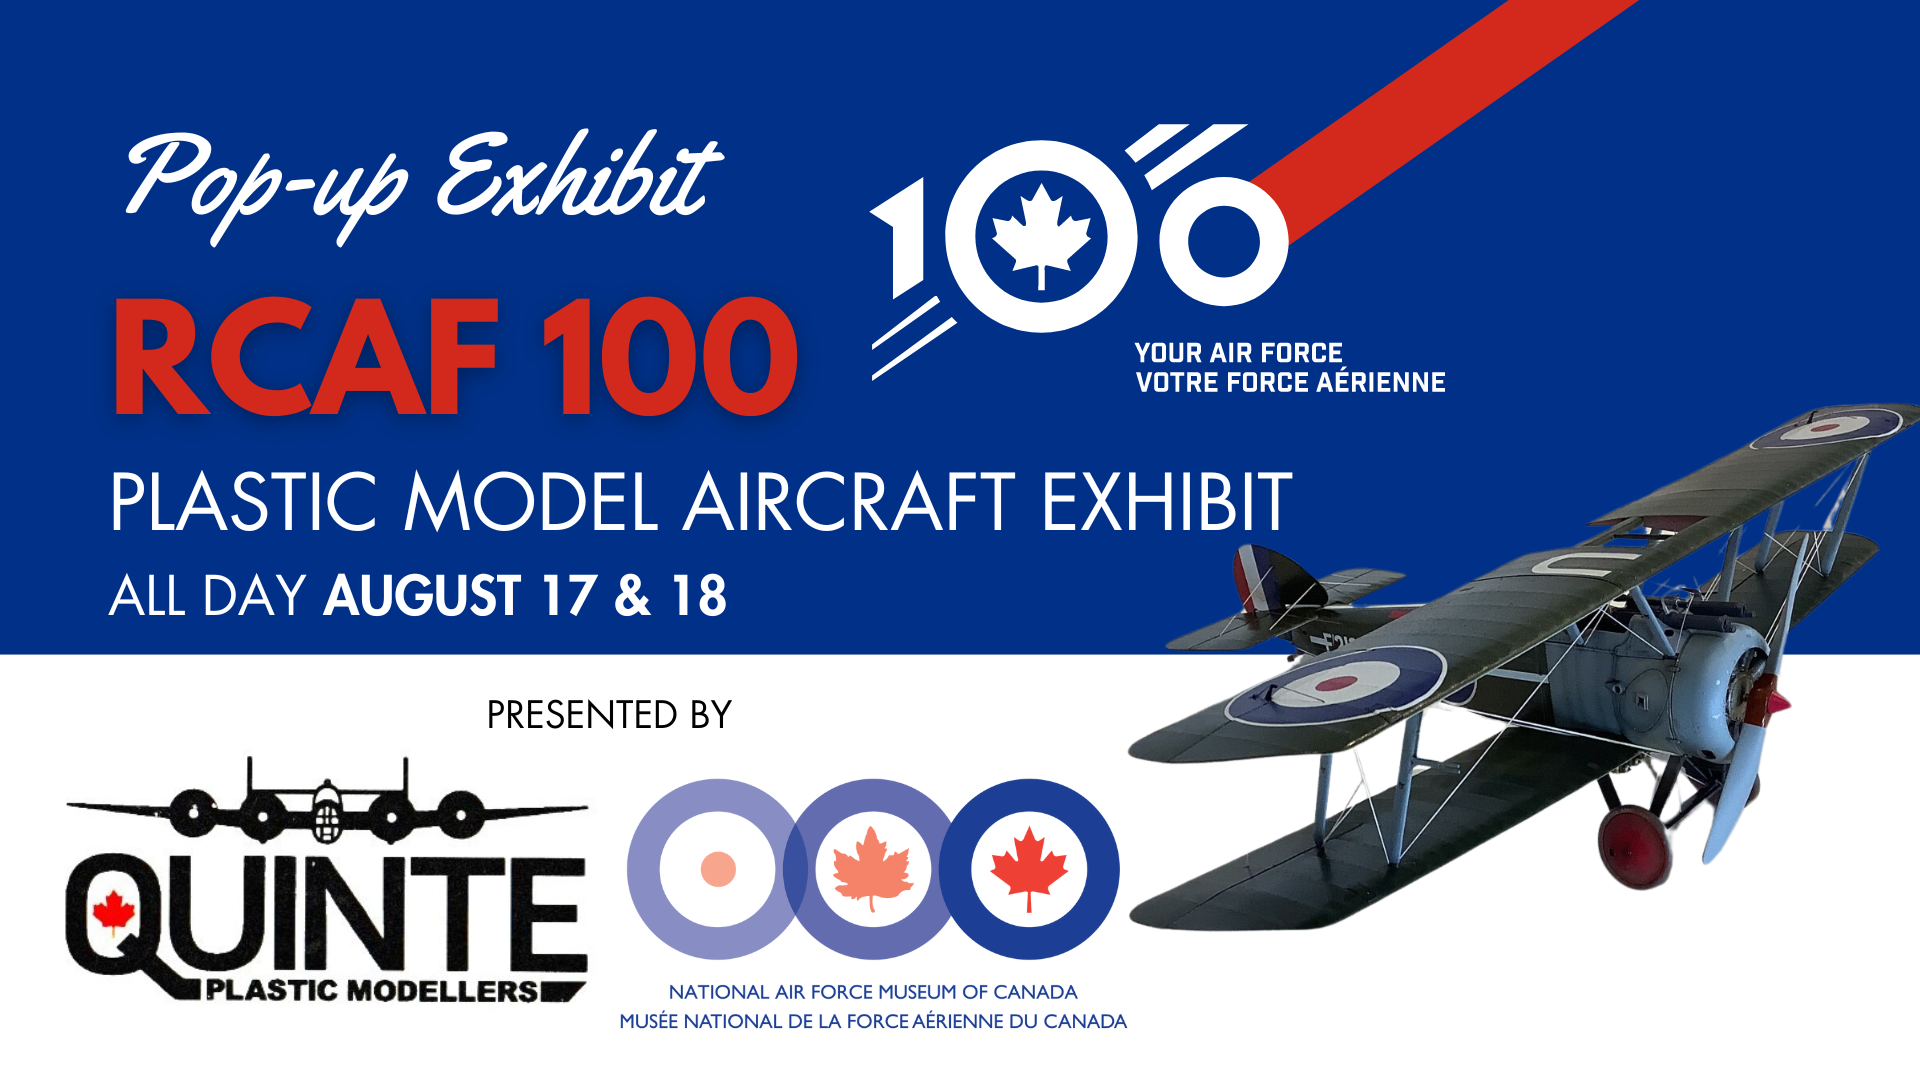 Poster for event showing a model airplane and has event details